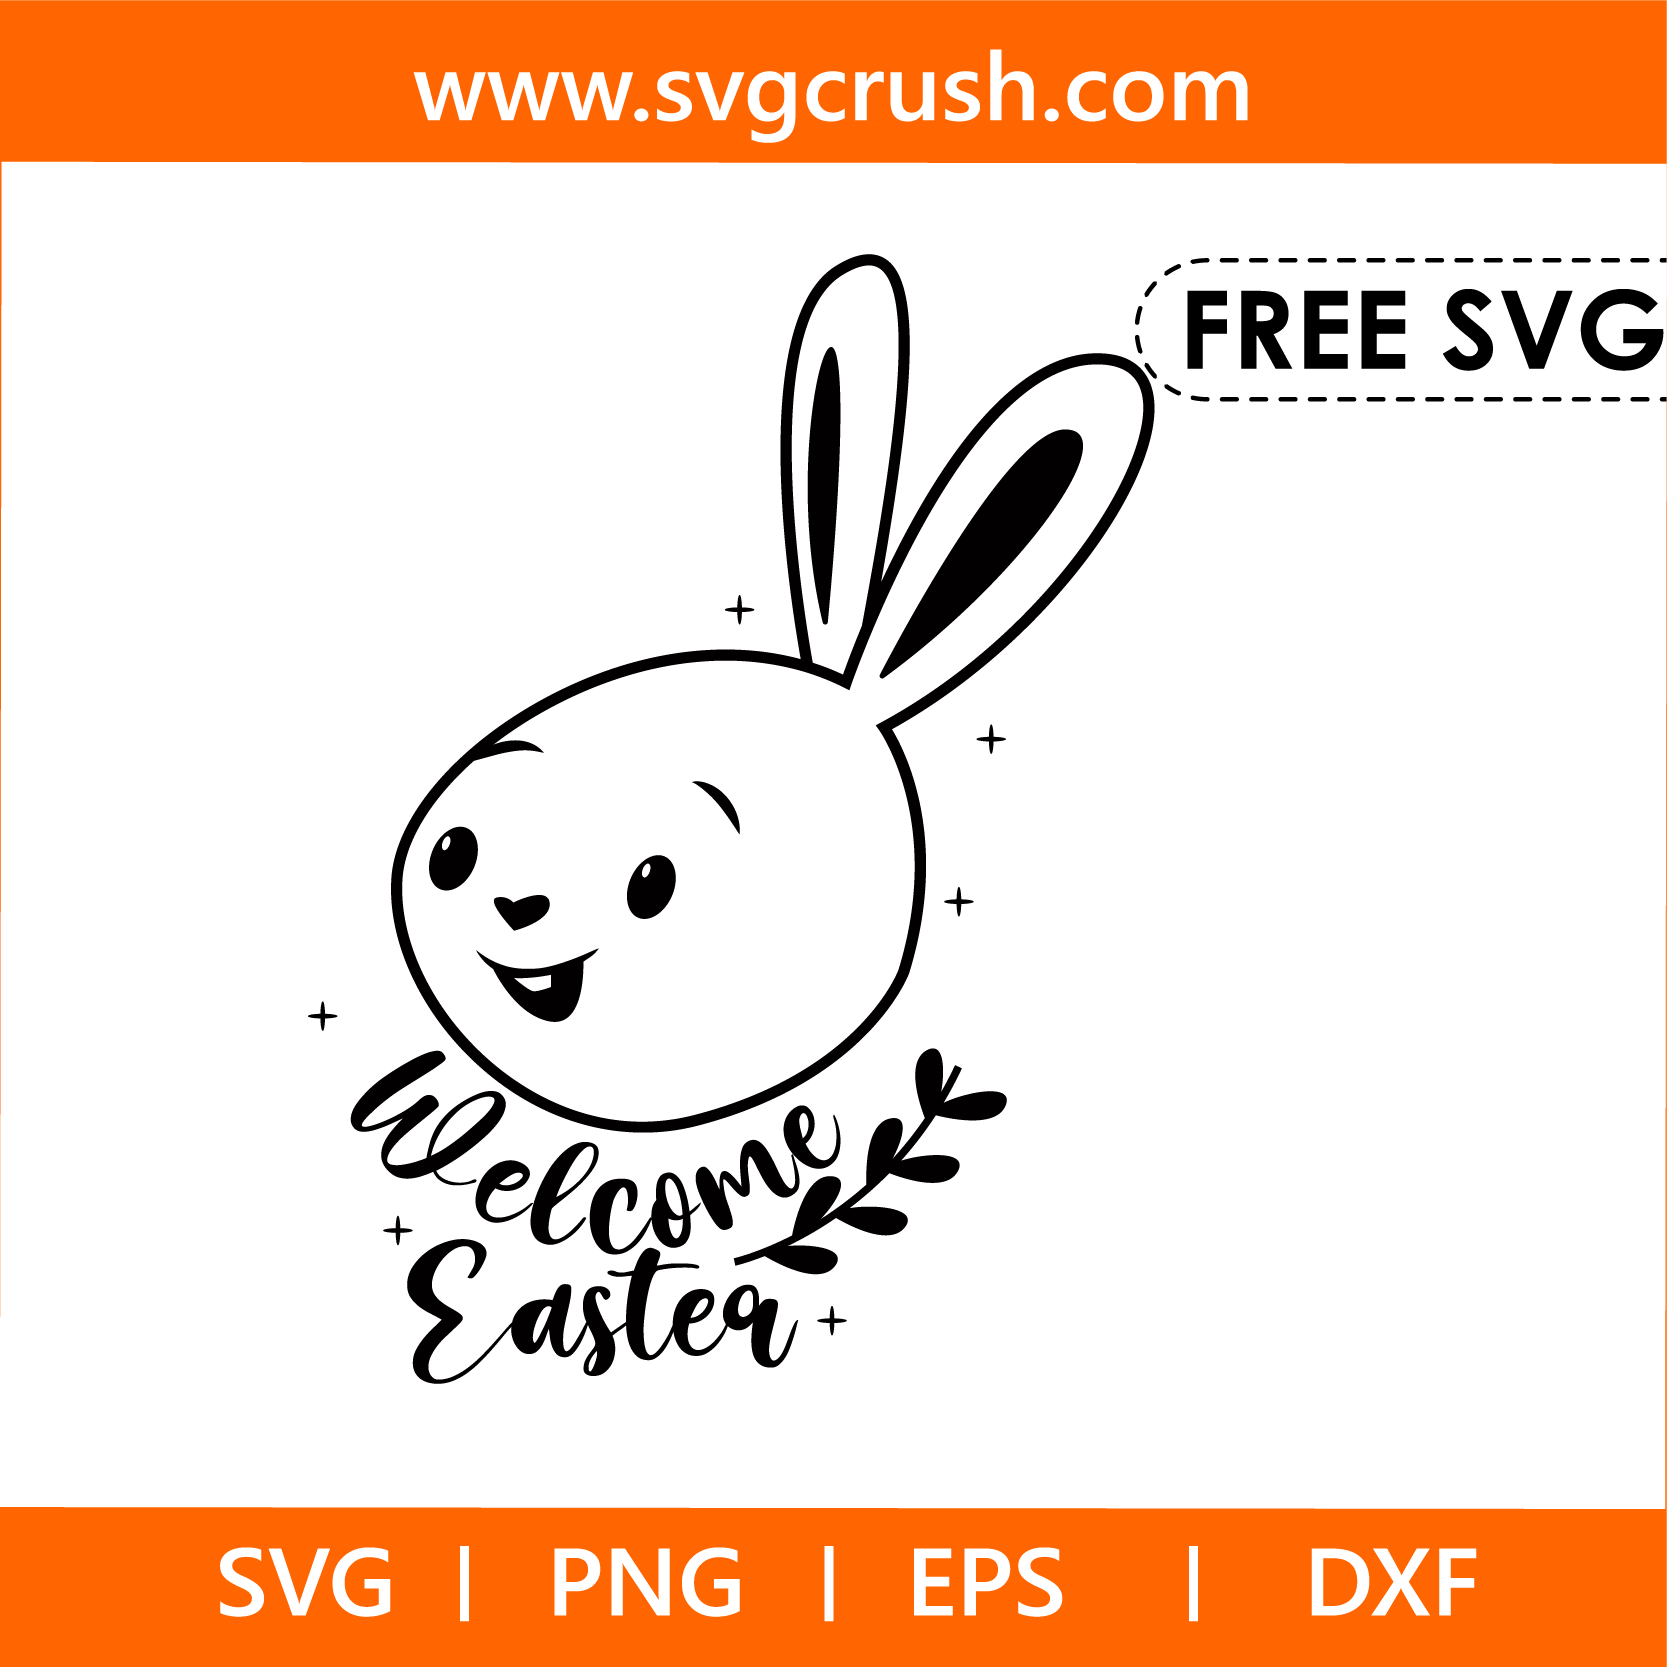 free welcome-easter-005 svg